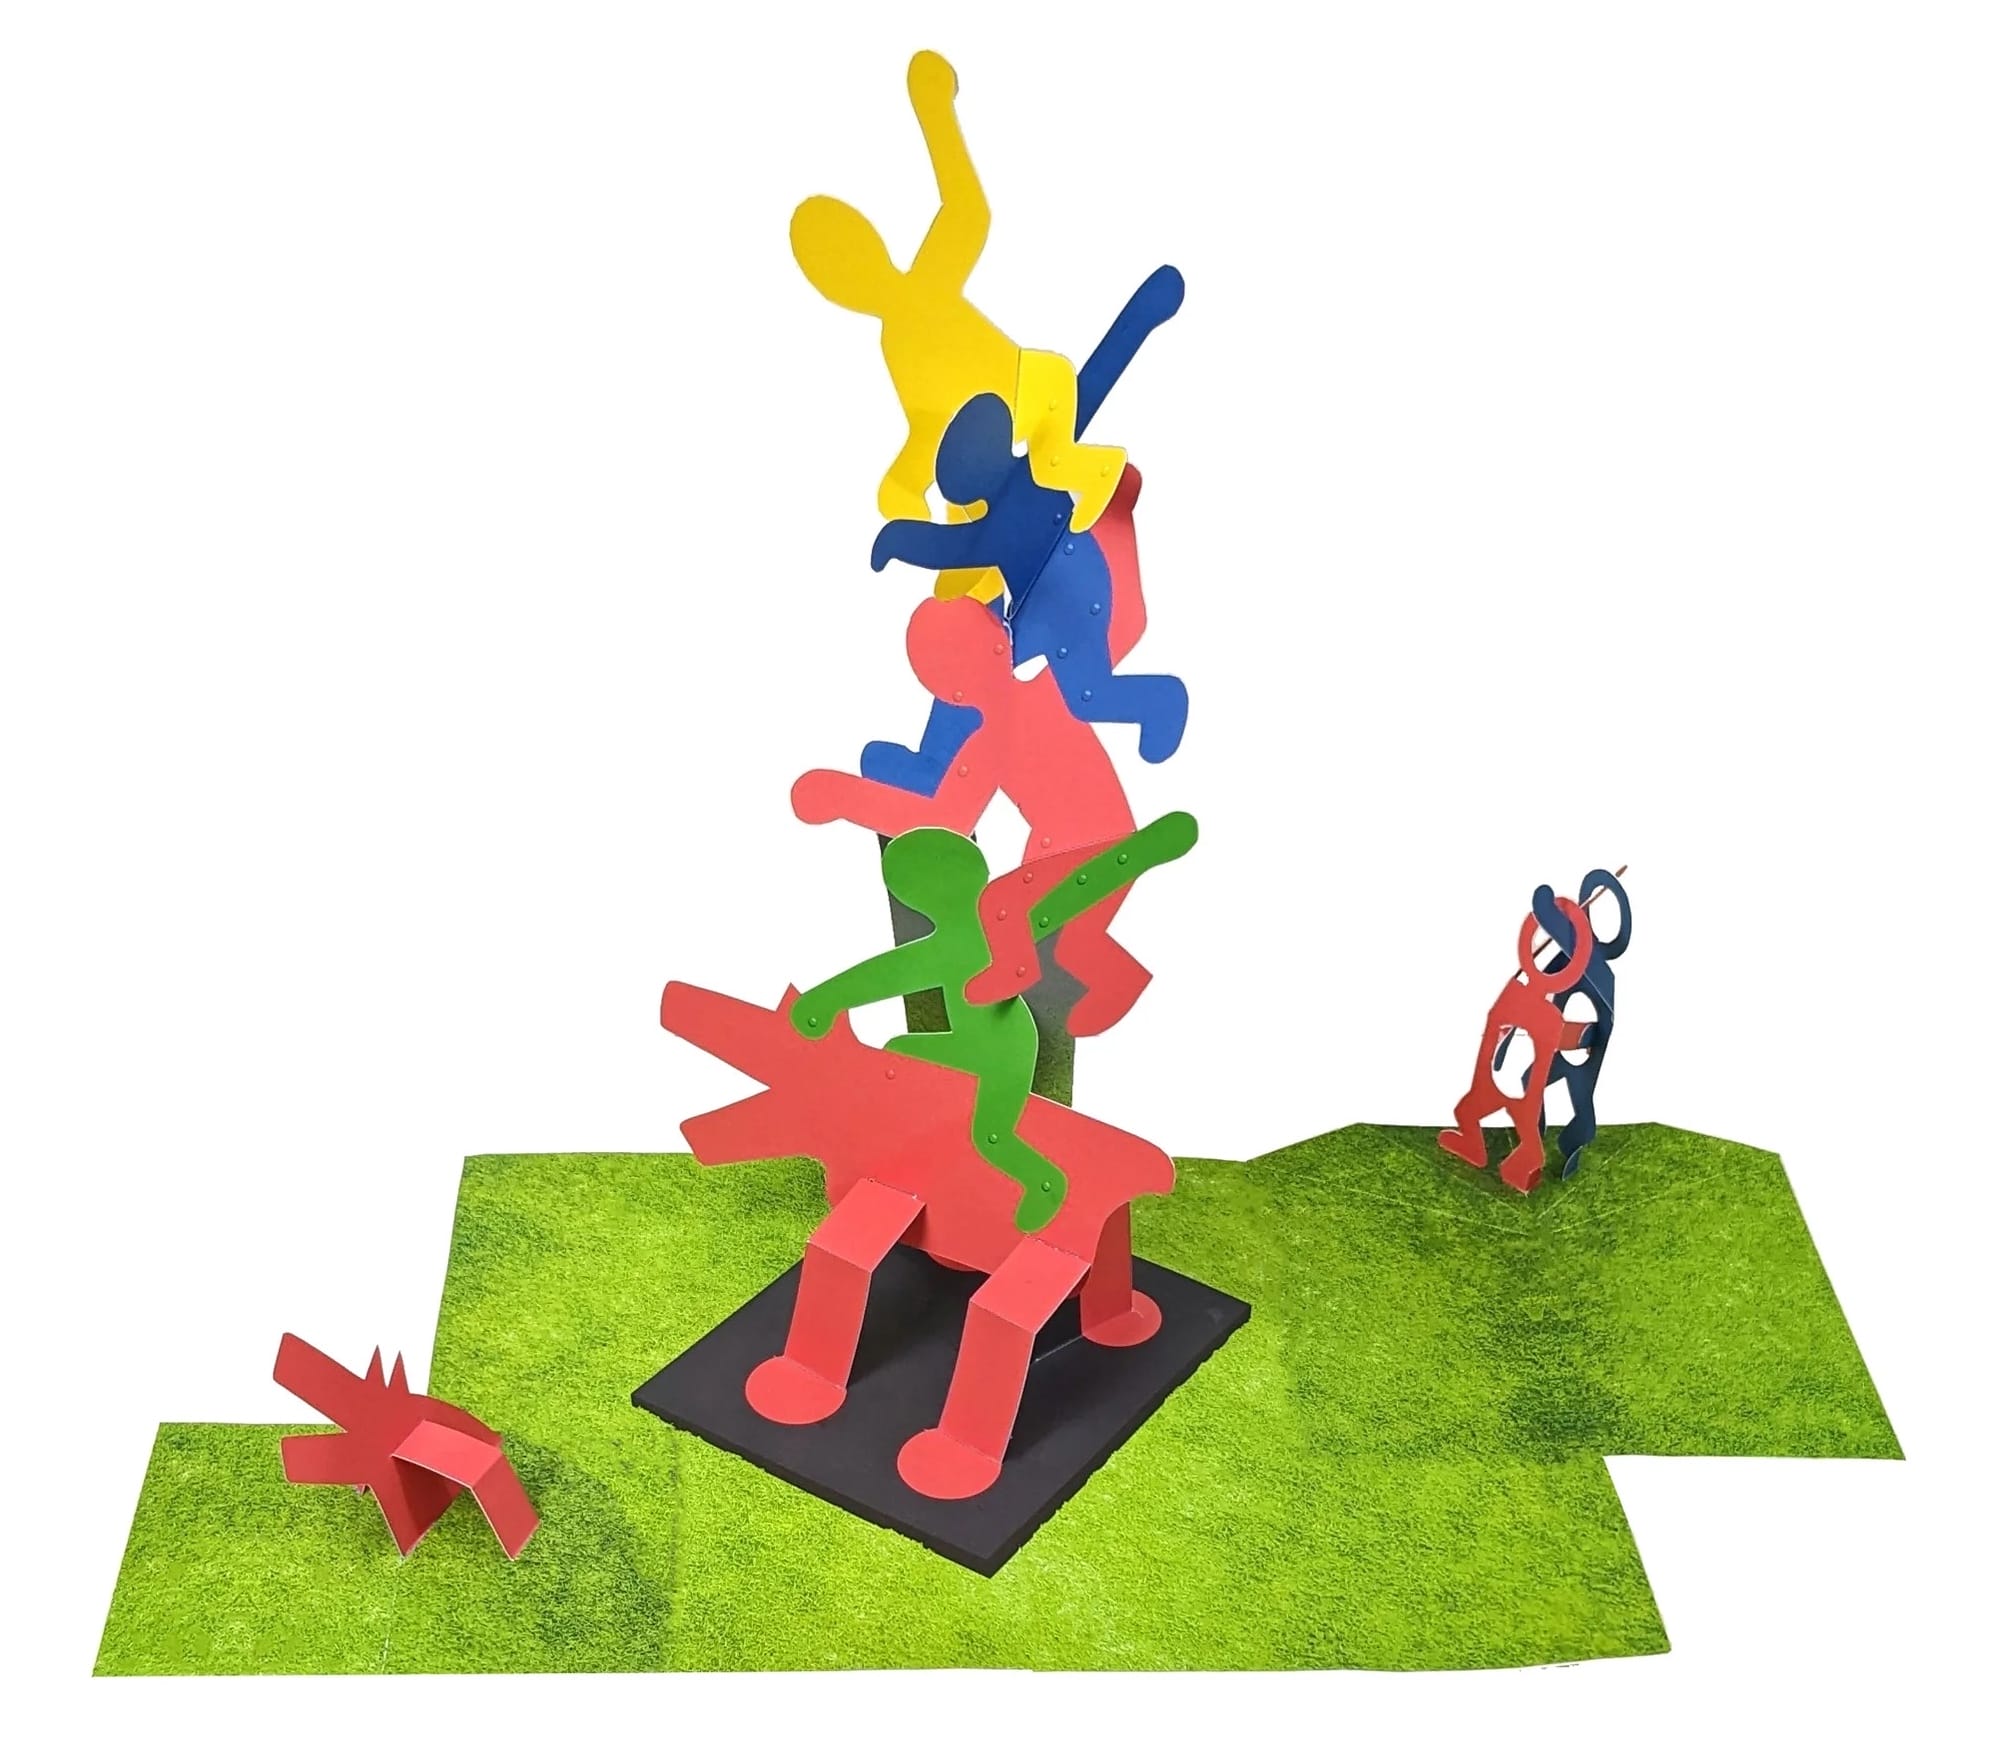 a pop-up paper spread from a pop-up book of artwork by Keith Haring, this piece depicting a stack of colorful androgynous figures on top of a red dog